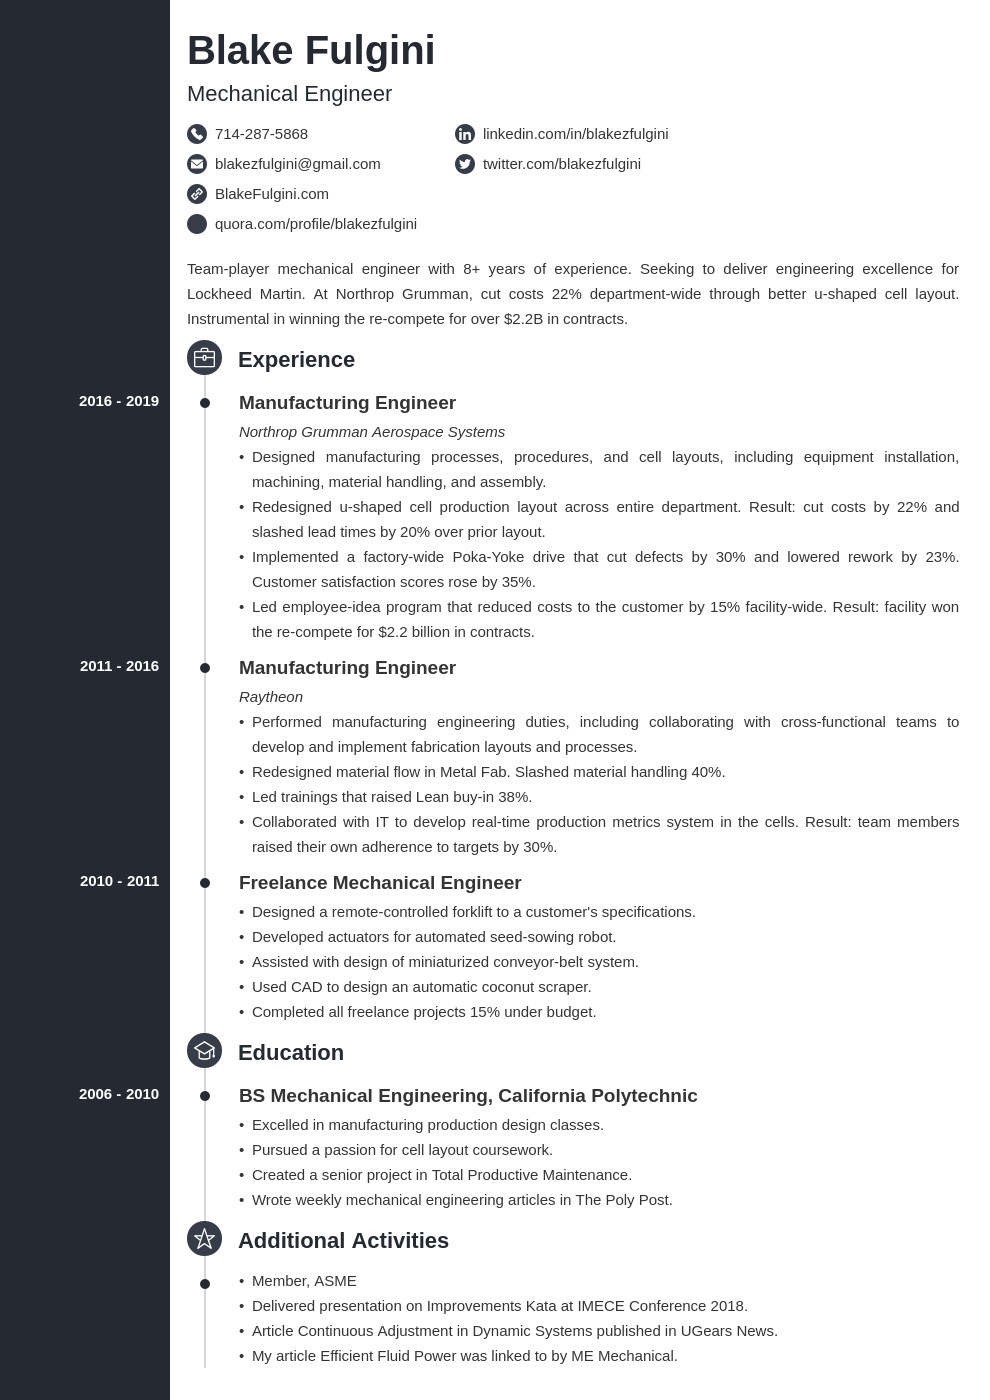 Professional Summary Resume Sample for Mechanical Engineer Mechanical Engineer Resume—examples and 25 Writing Tips